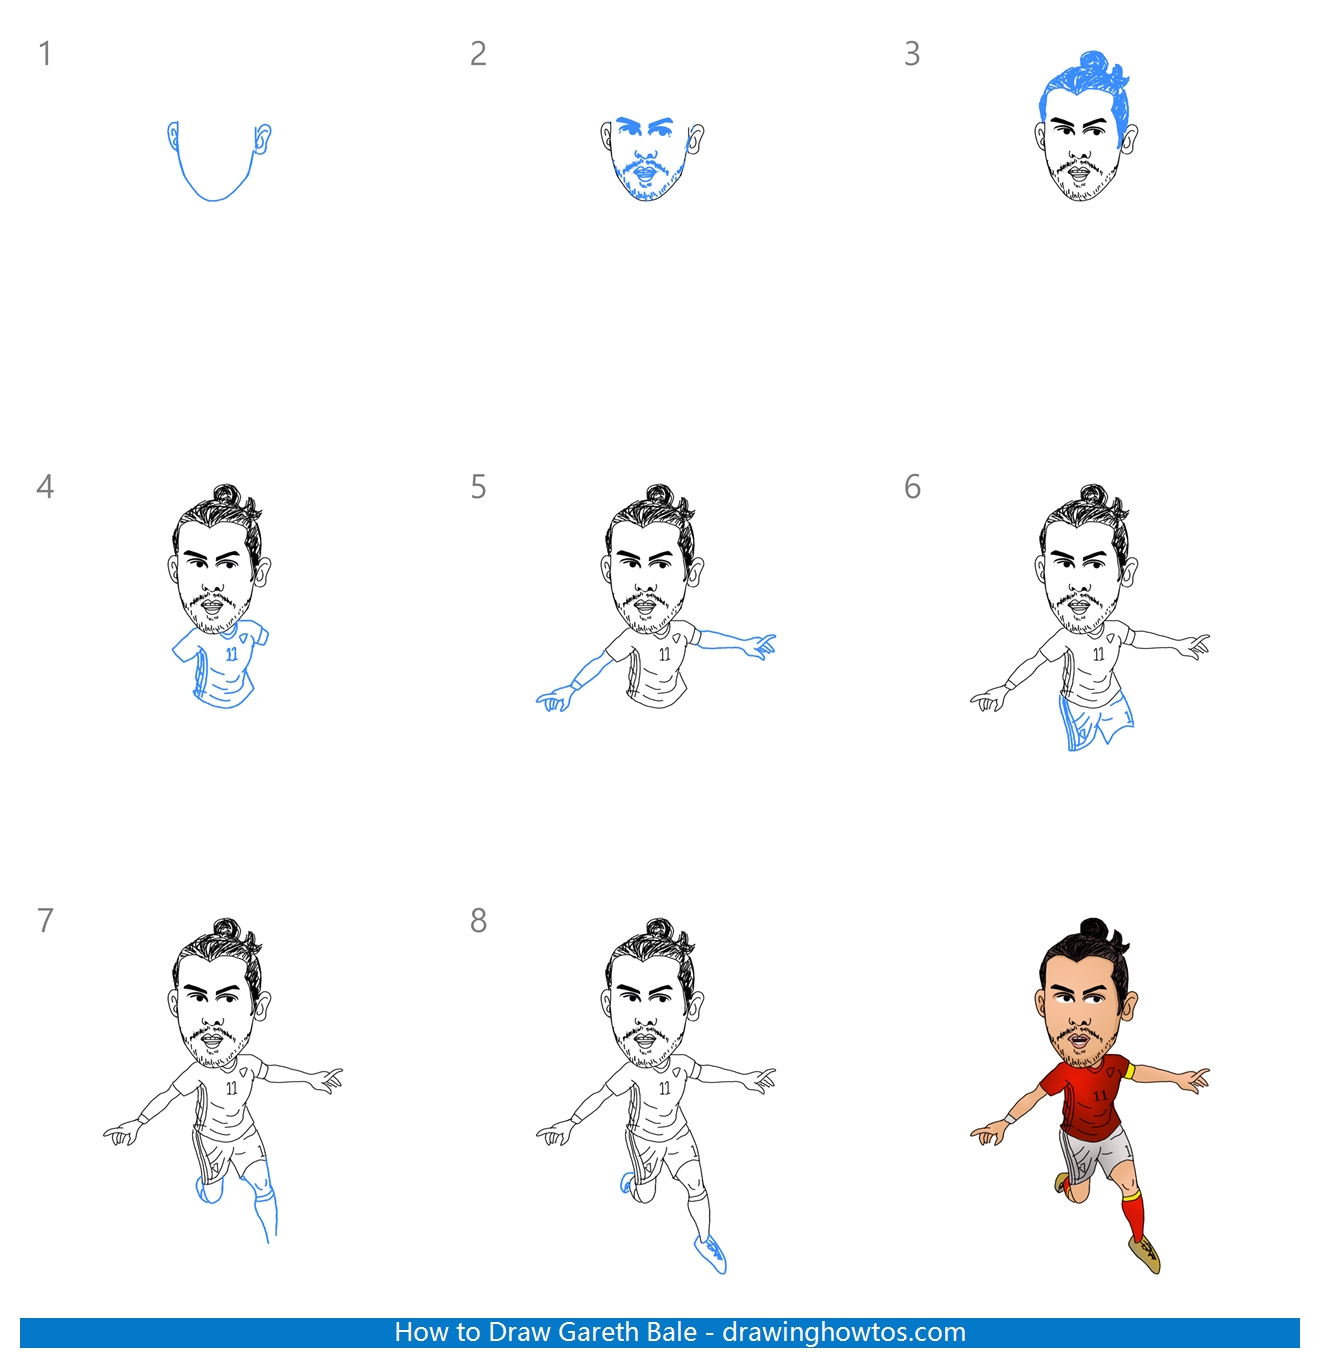 How to Draw Gareth Bale Step by Step